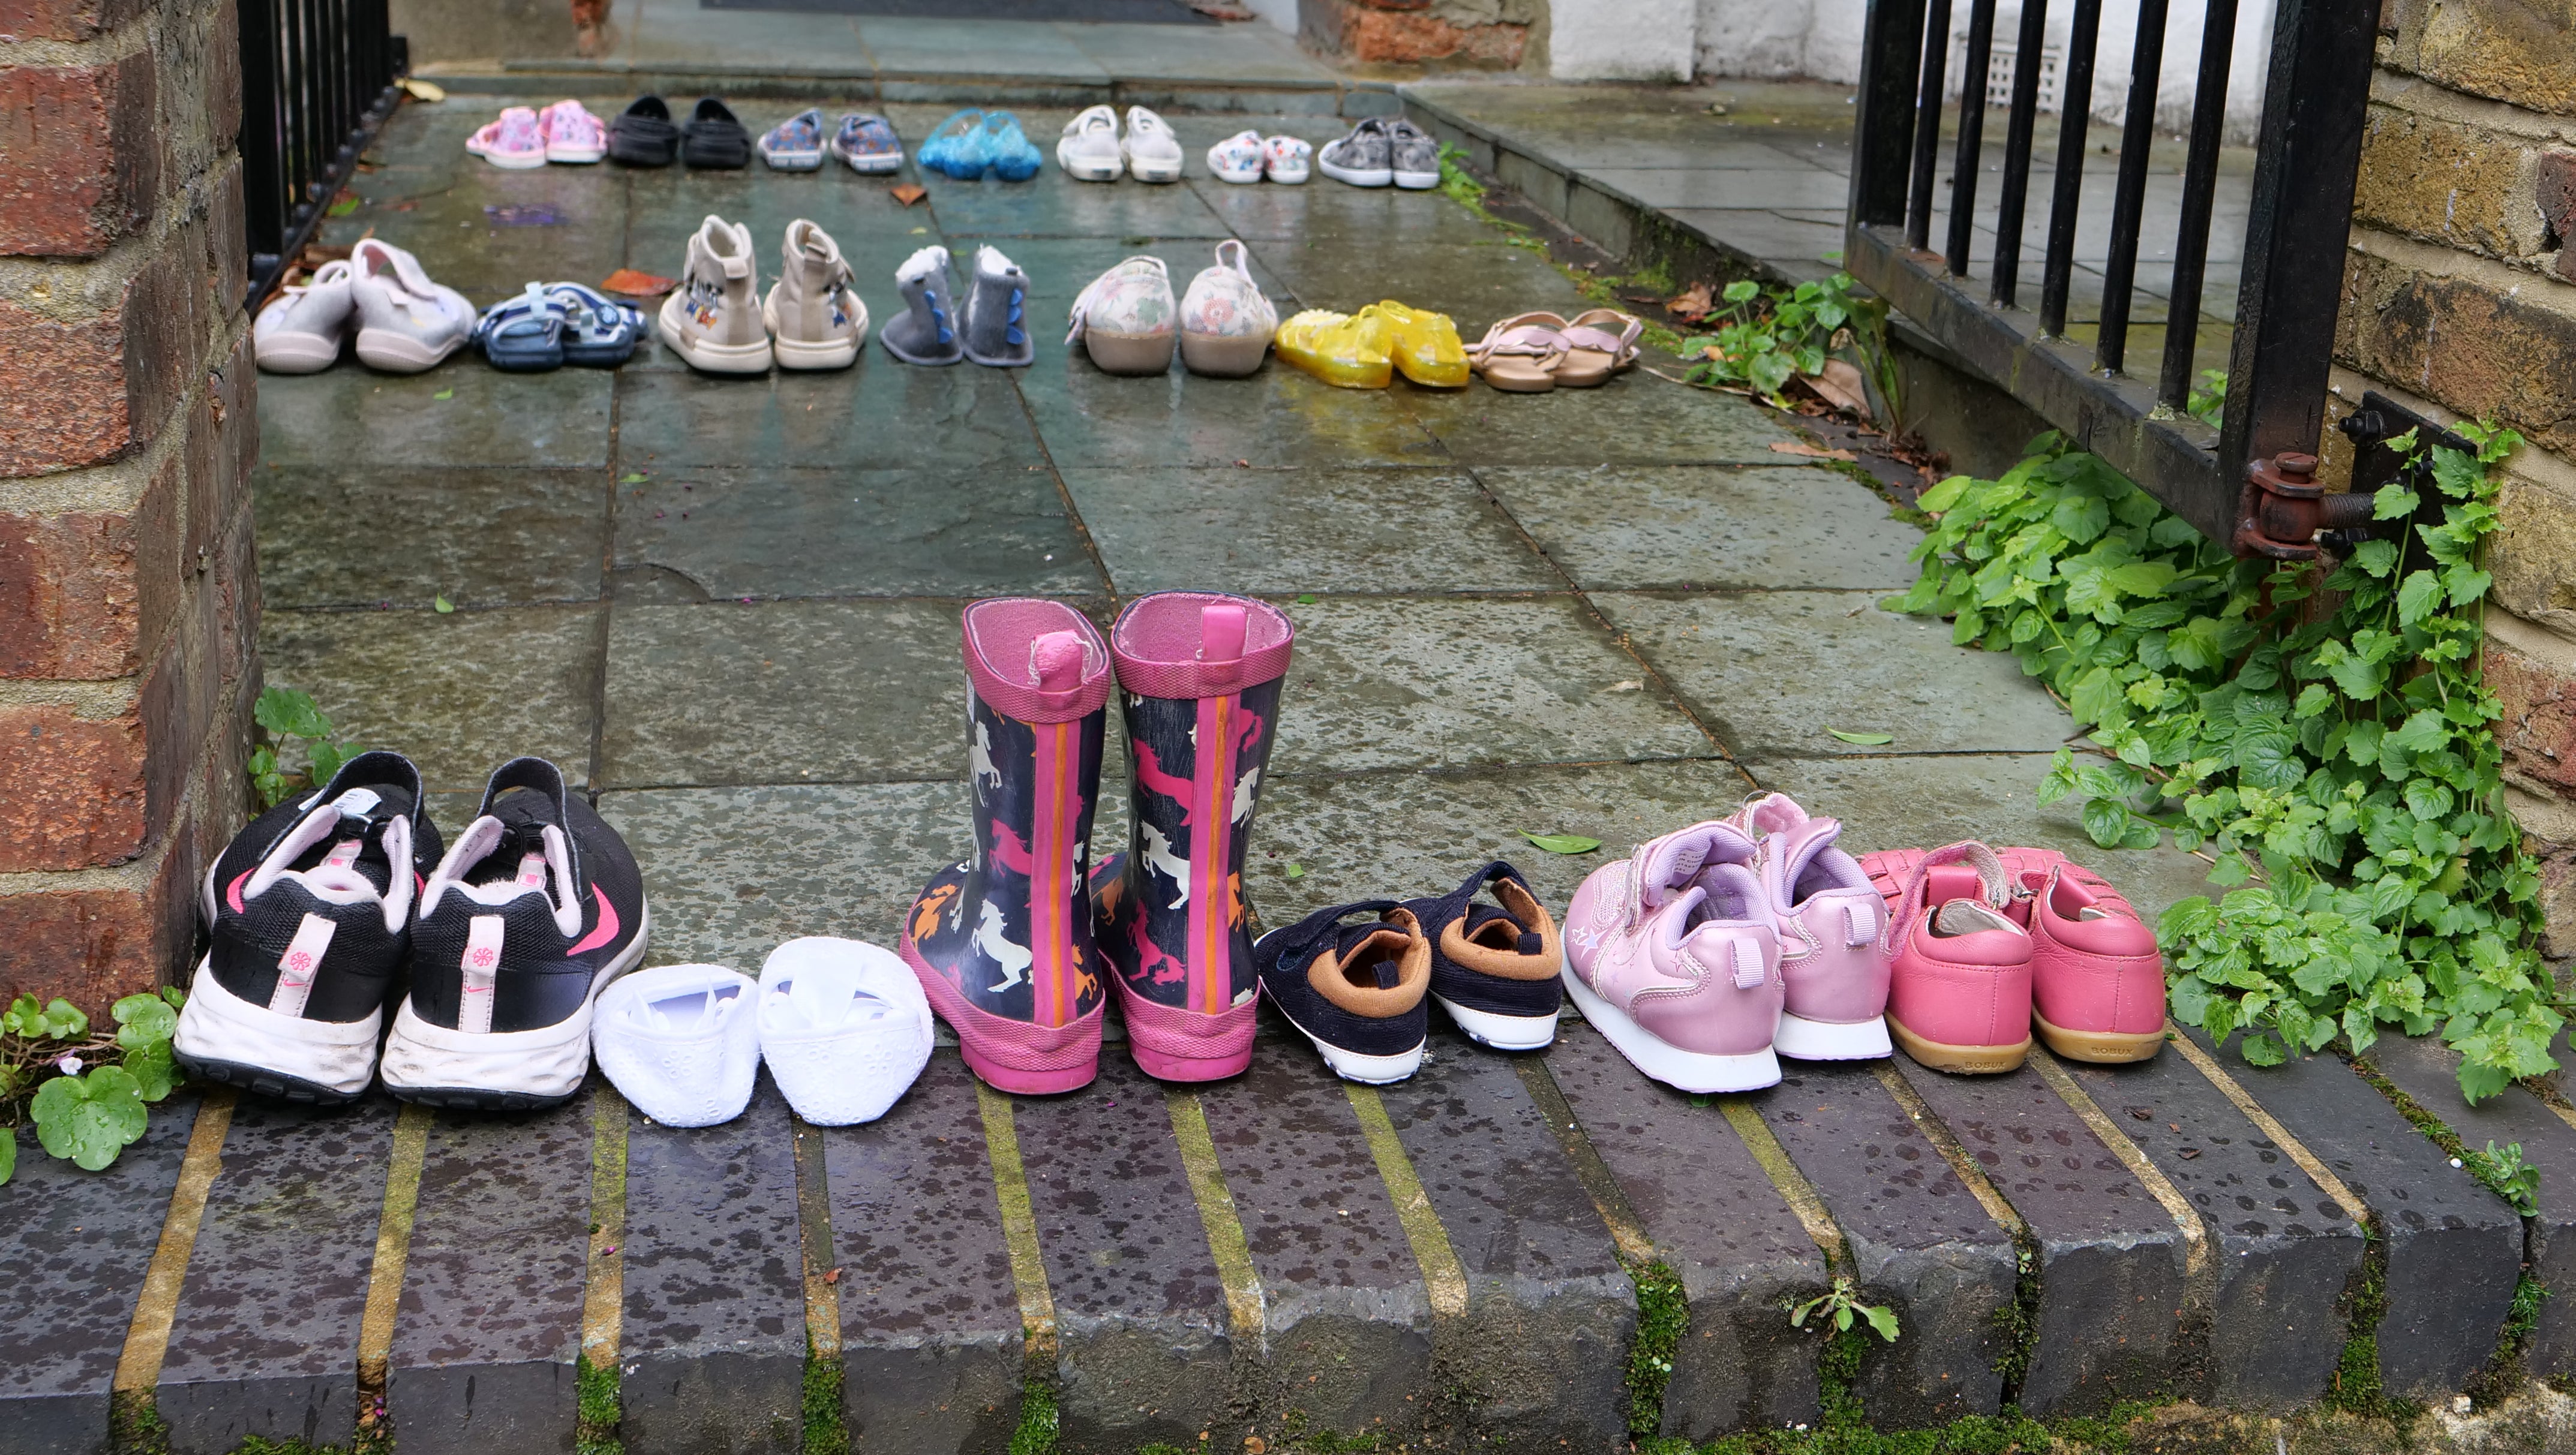 Children’s shoes were placed outside his front doorstep to represent the children killed in Gaza